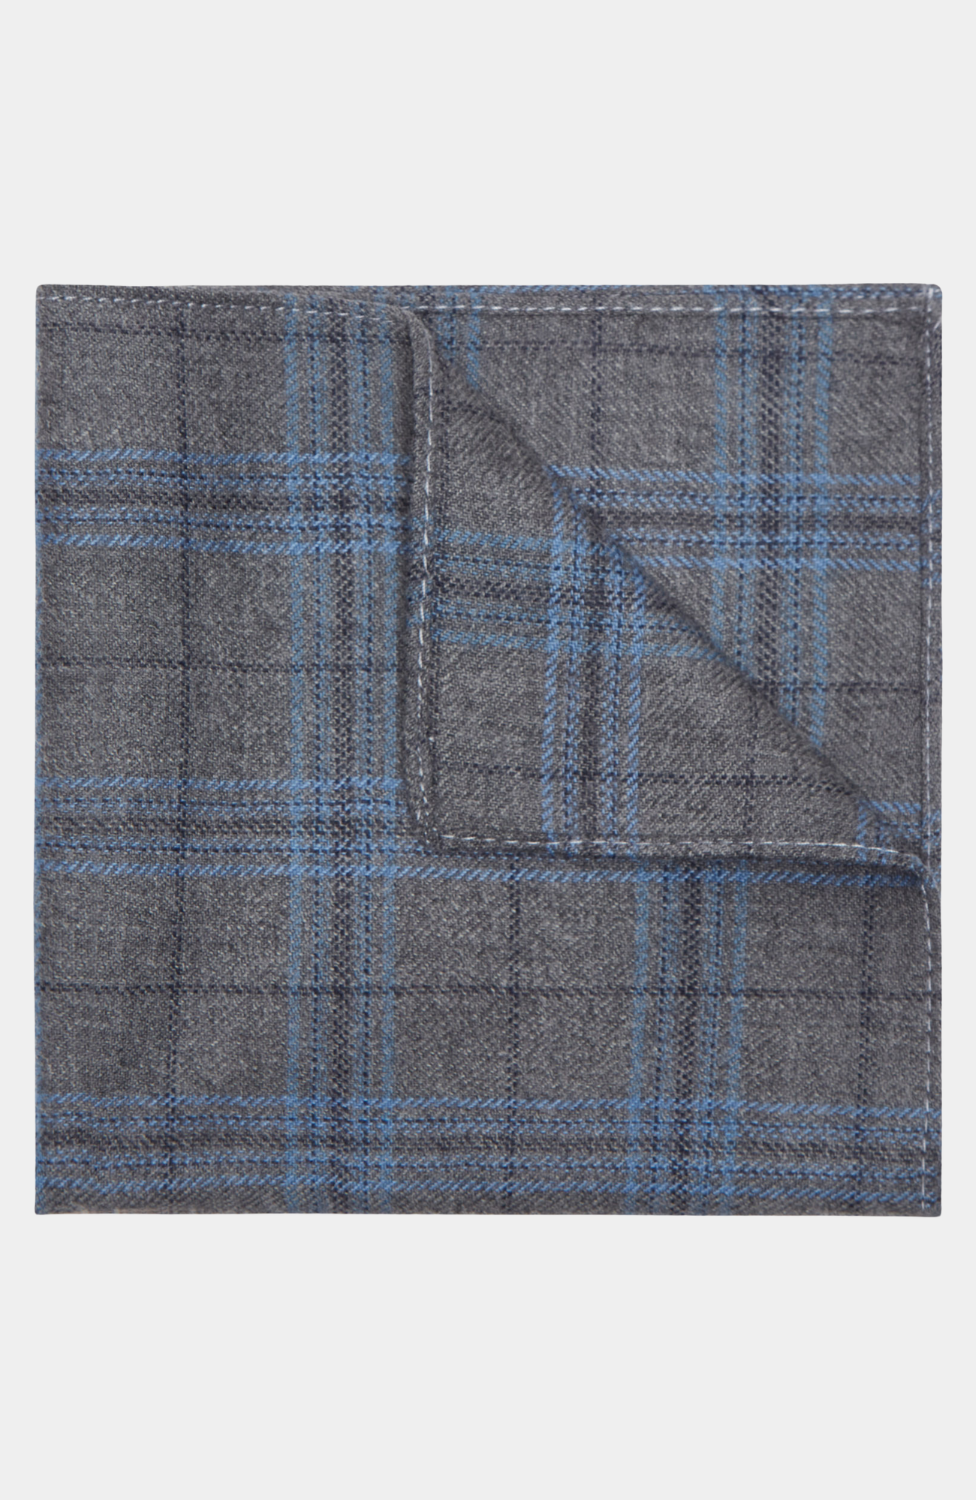 JERSEY POCKET SQUARE - HIRE